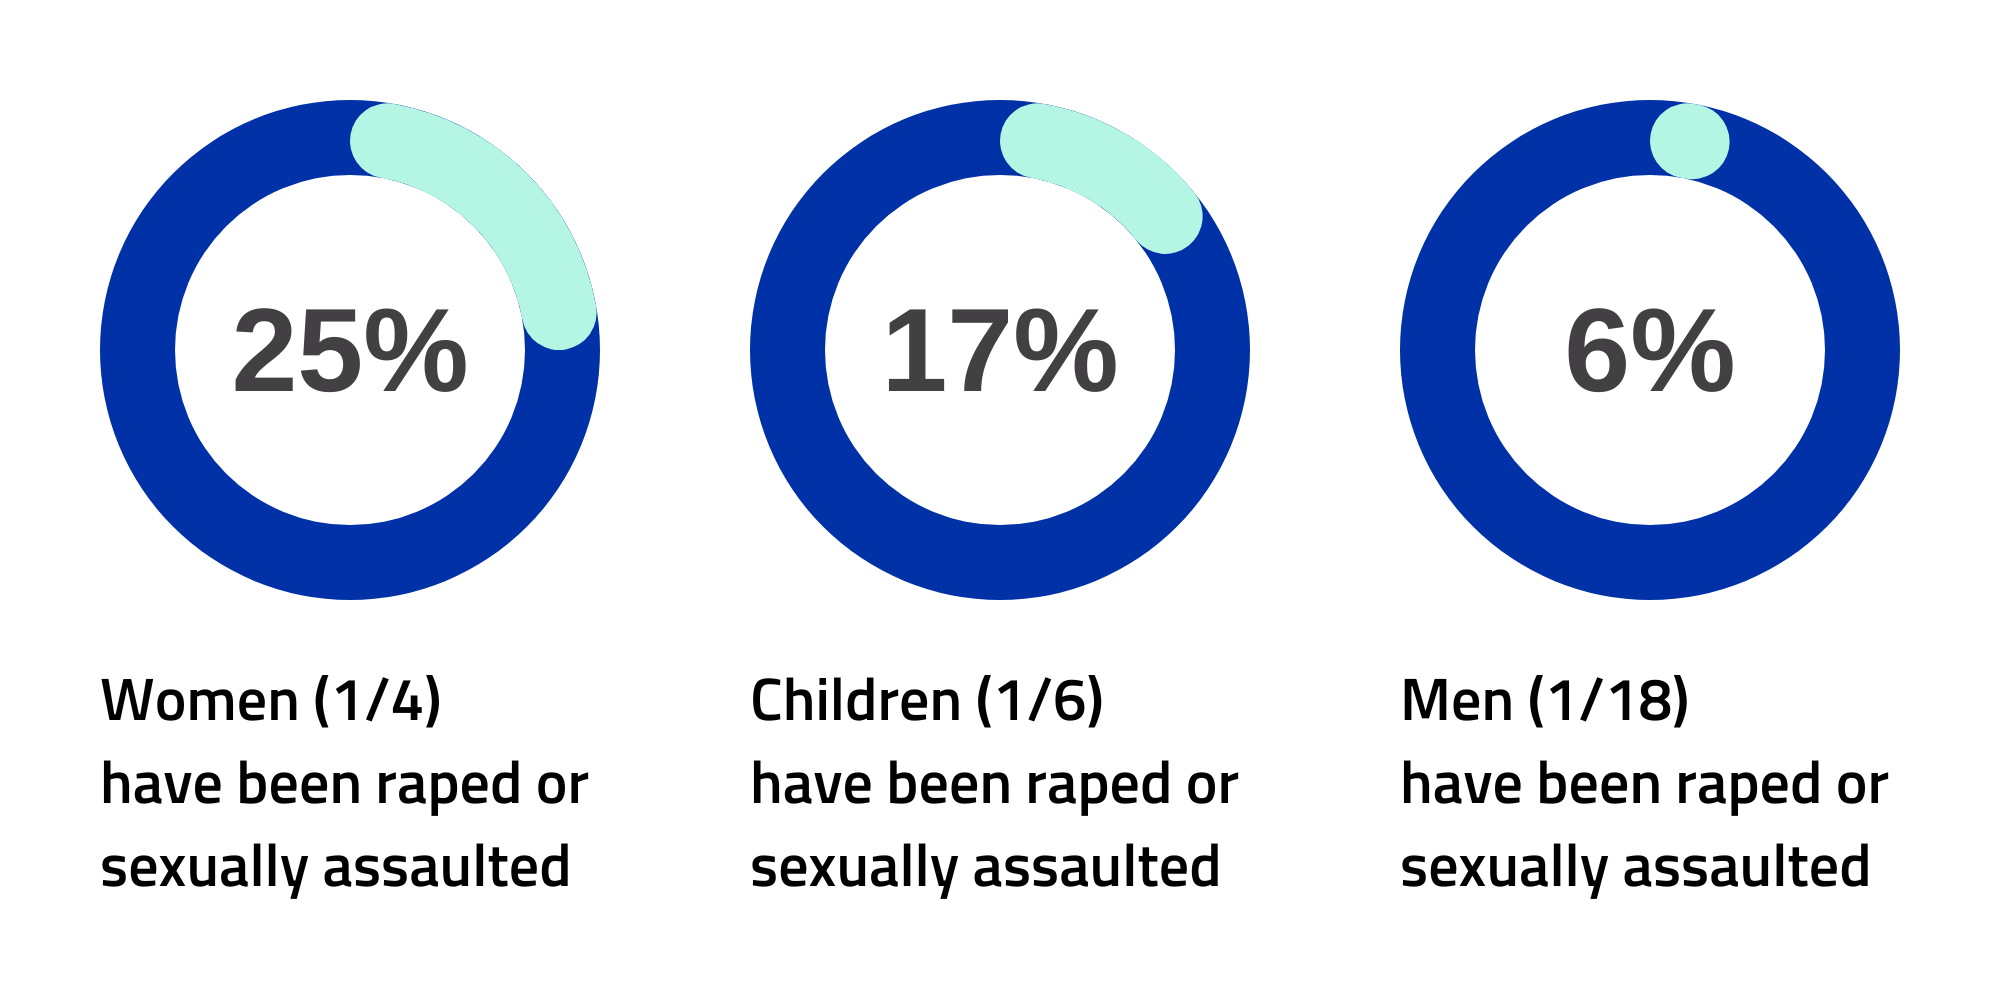 statistics on sexual assaults and rape as a pie chart: Women (1/4)
have been raped or sexually assaulted, Children (1/6)
have been raped or sexually assaulted, Men (1/18)
have been raped or sexually assaulted 